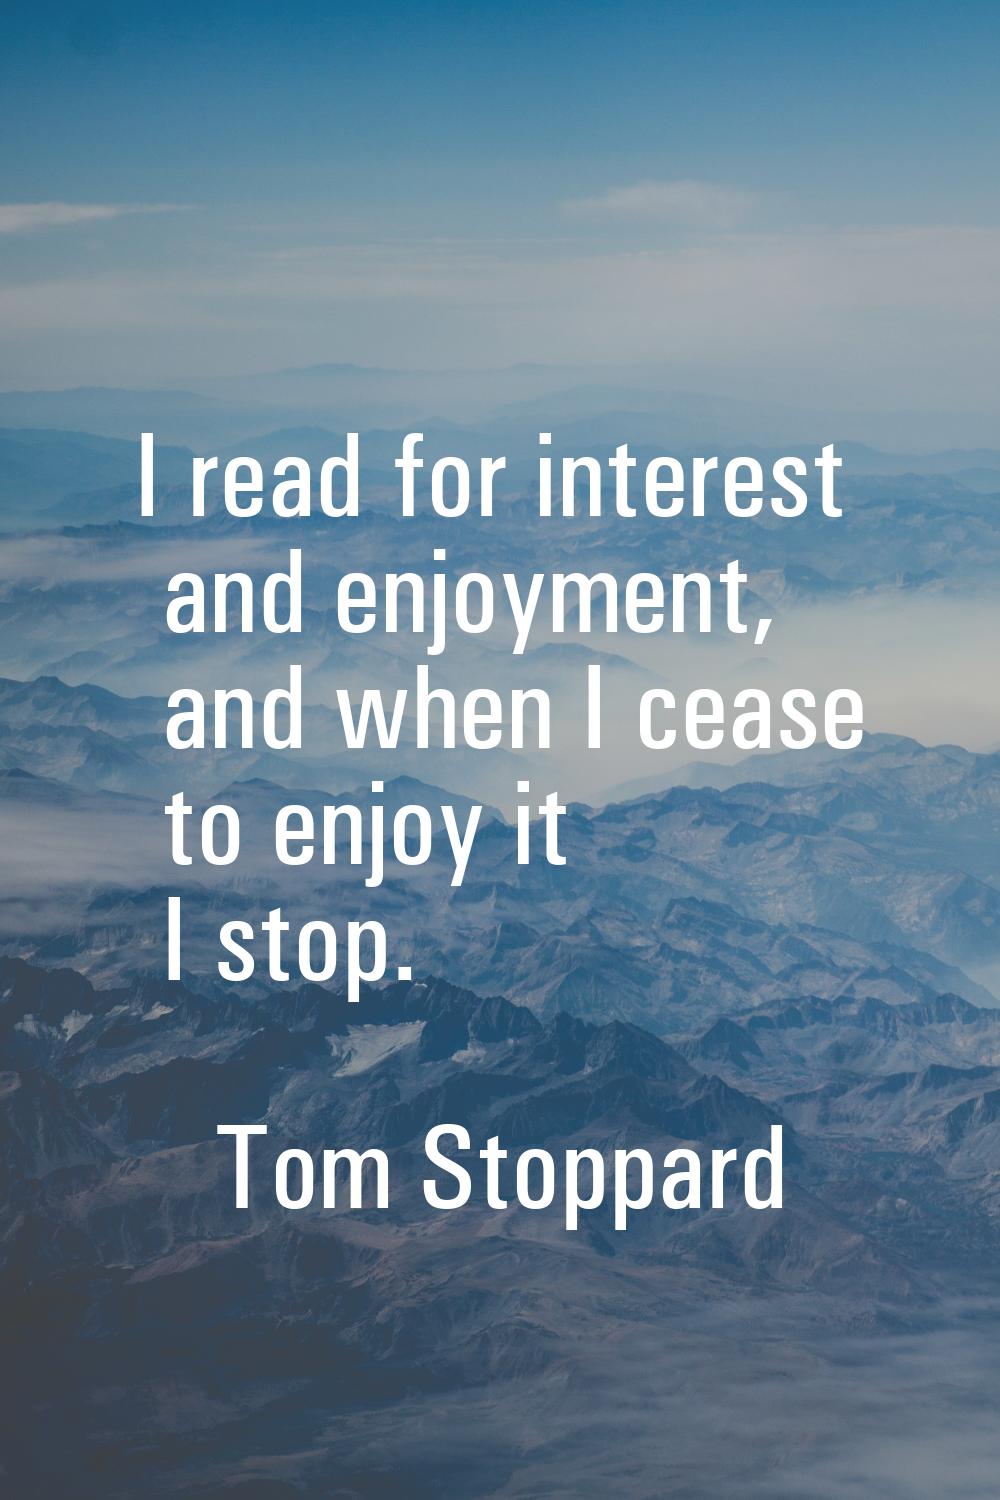 I read for interest and enjoyment, and when I cease to enjoy it I stop.